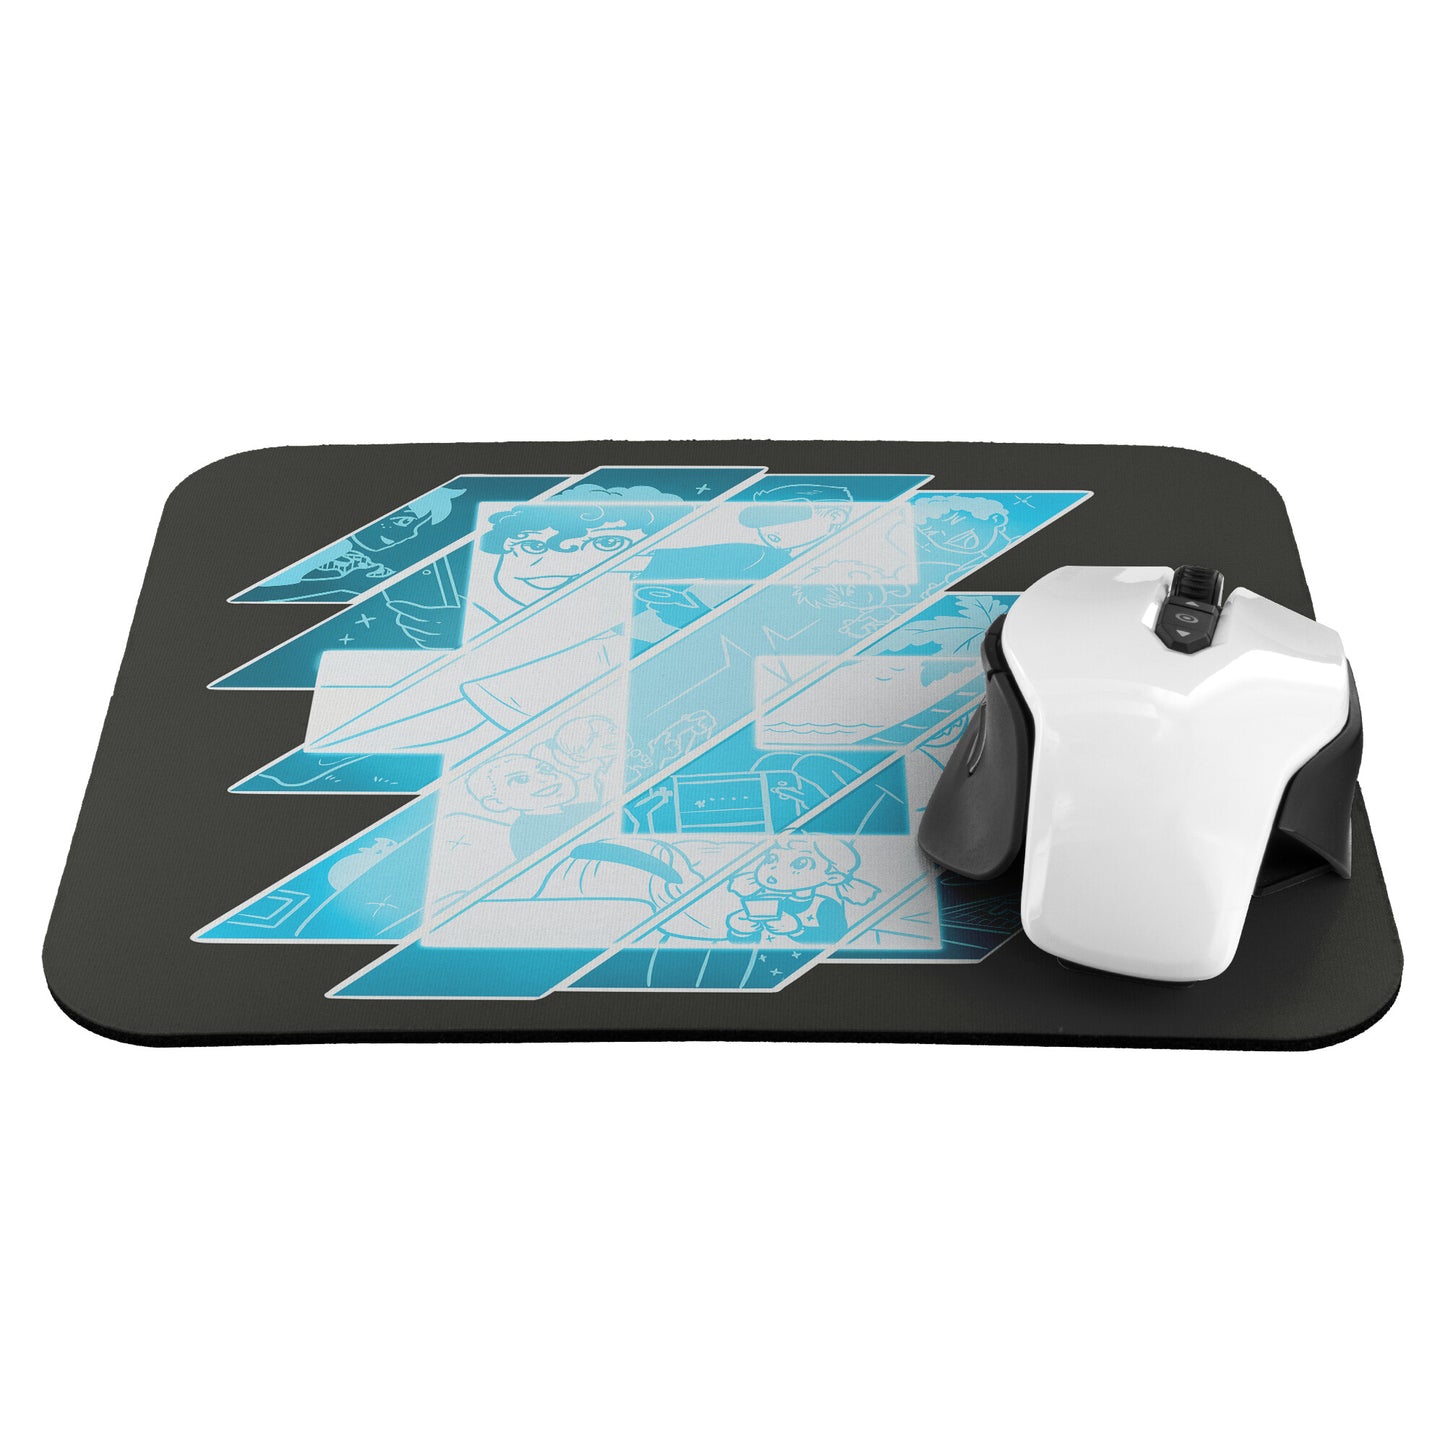 GCN collector's edition mousepad